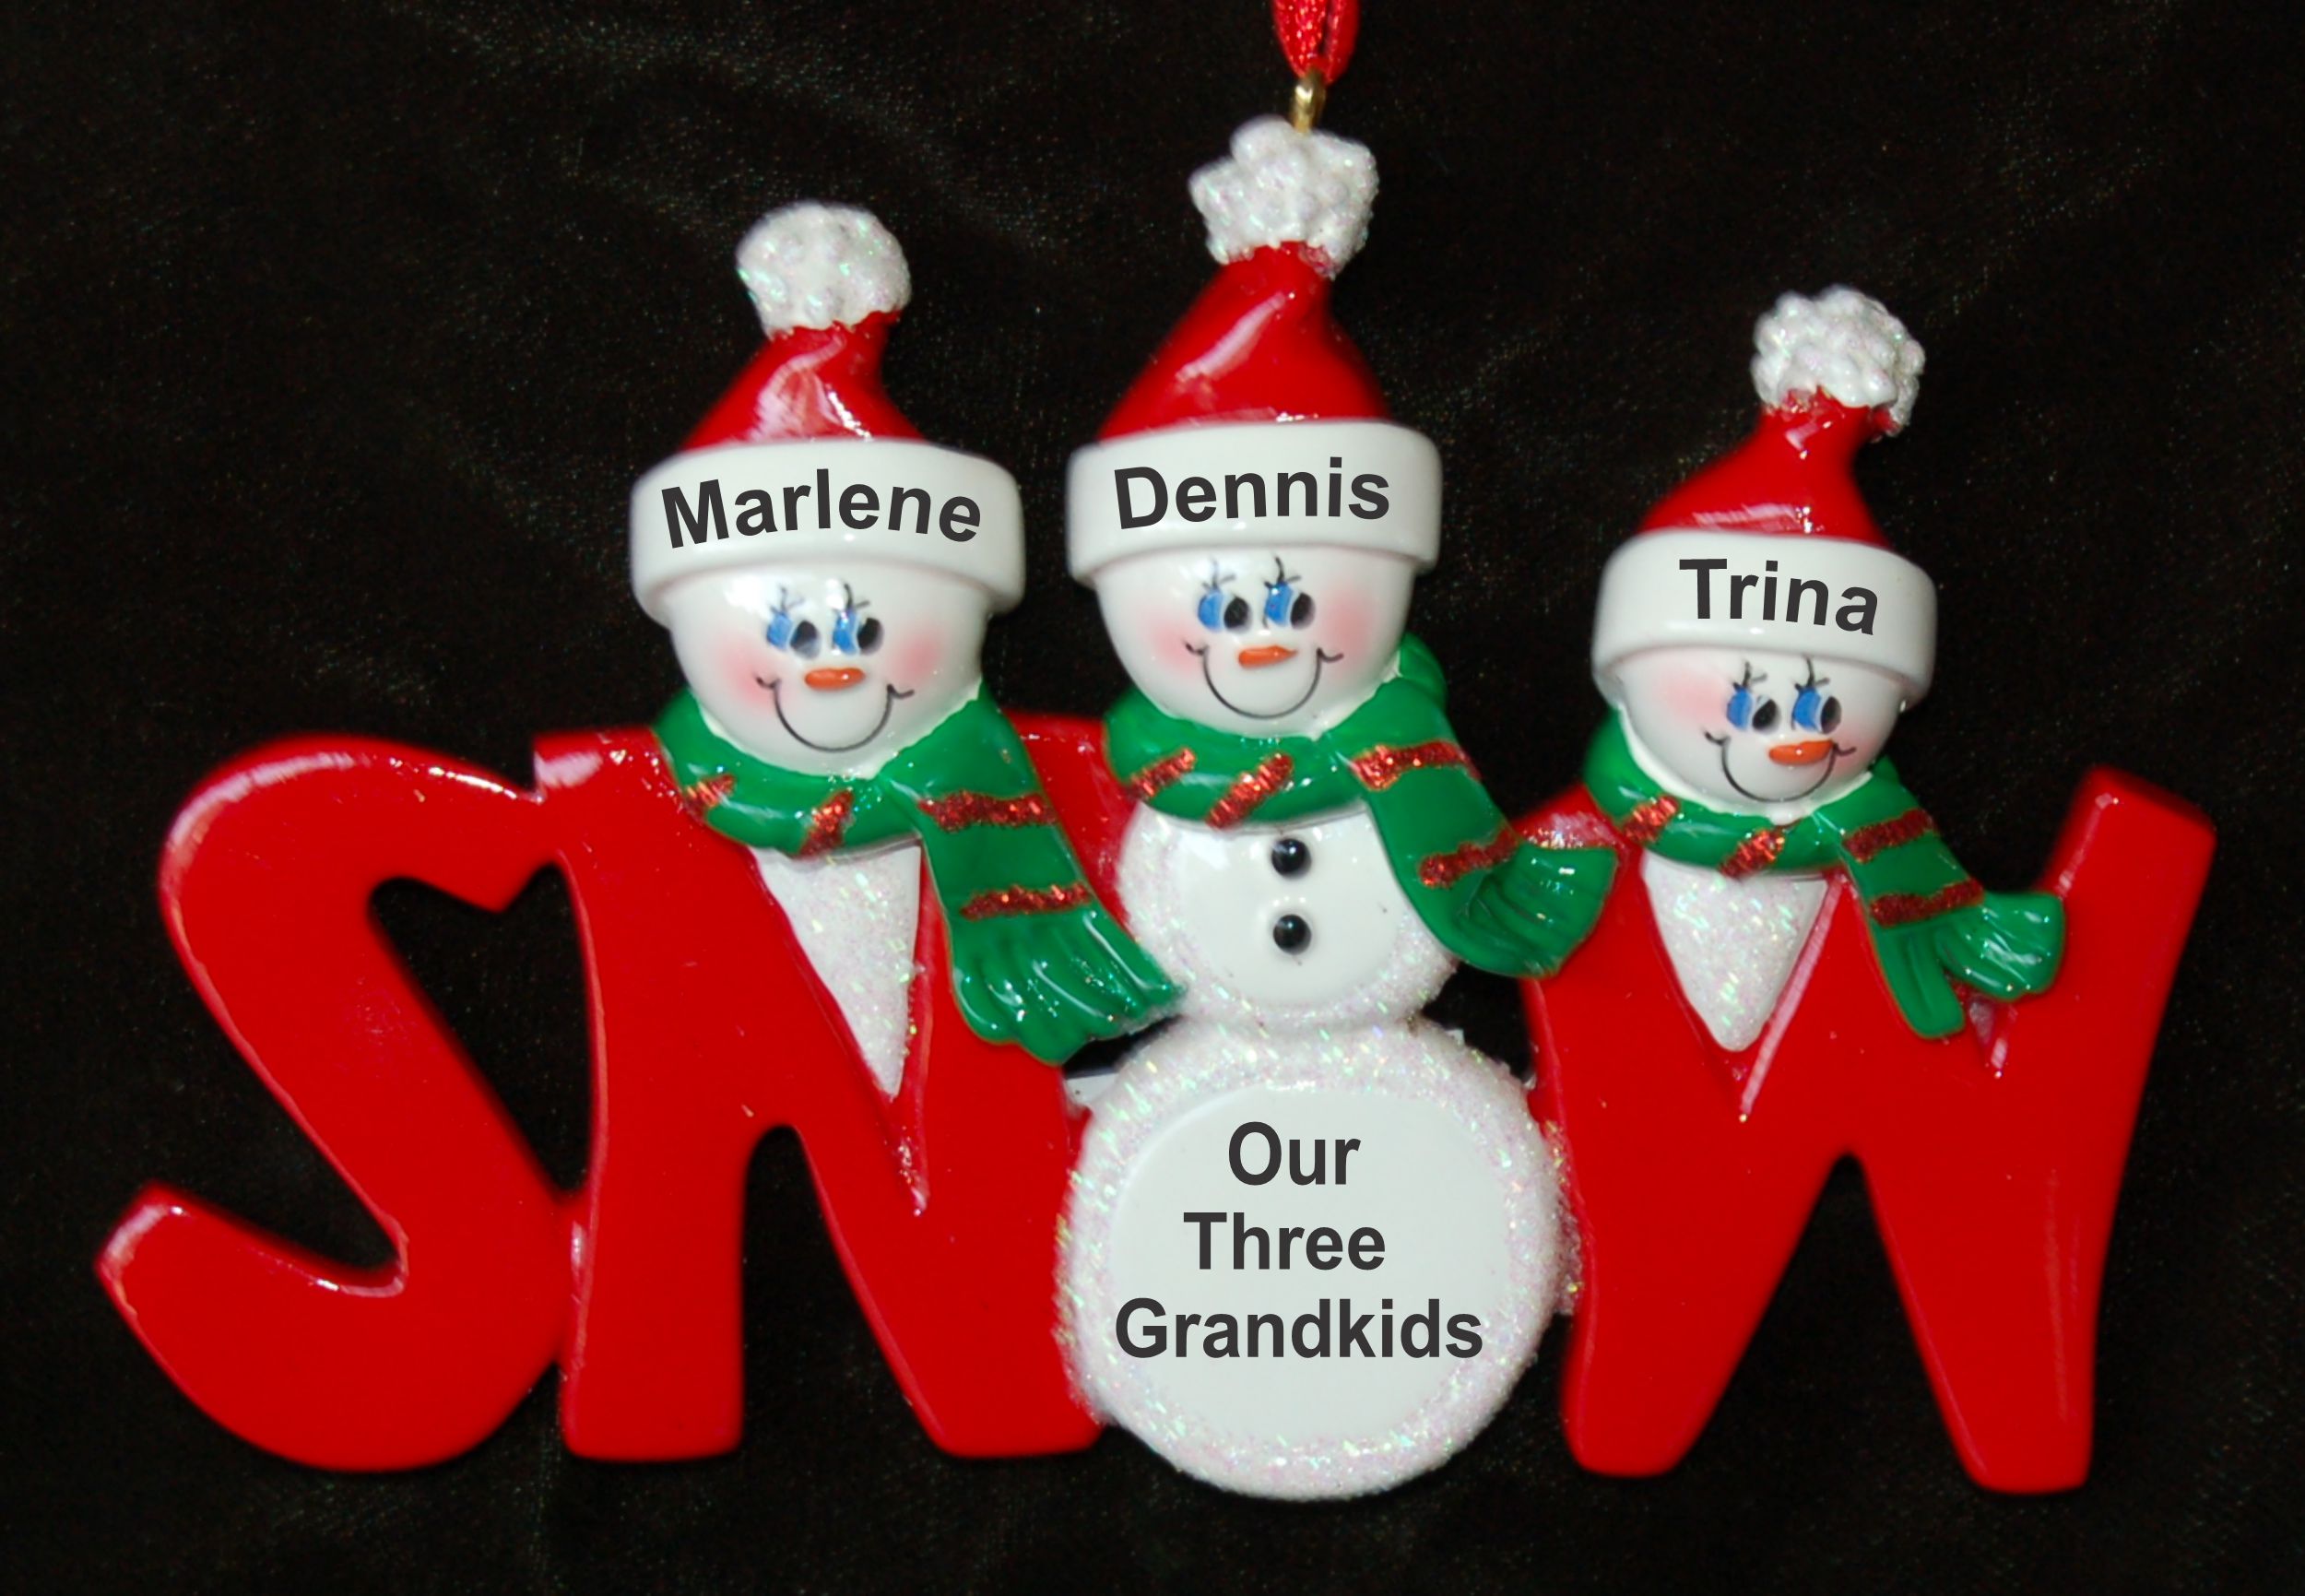 Personalized Grandparents Christmas Ornament Snow Much Fun 3 Grandkids by Russell Rhodes